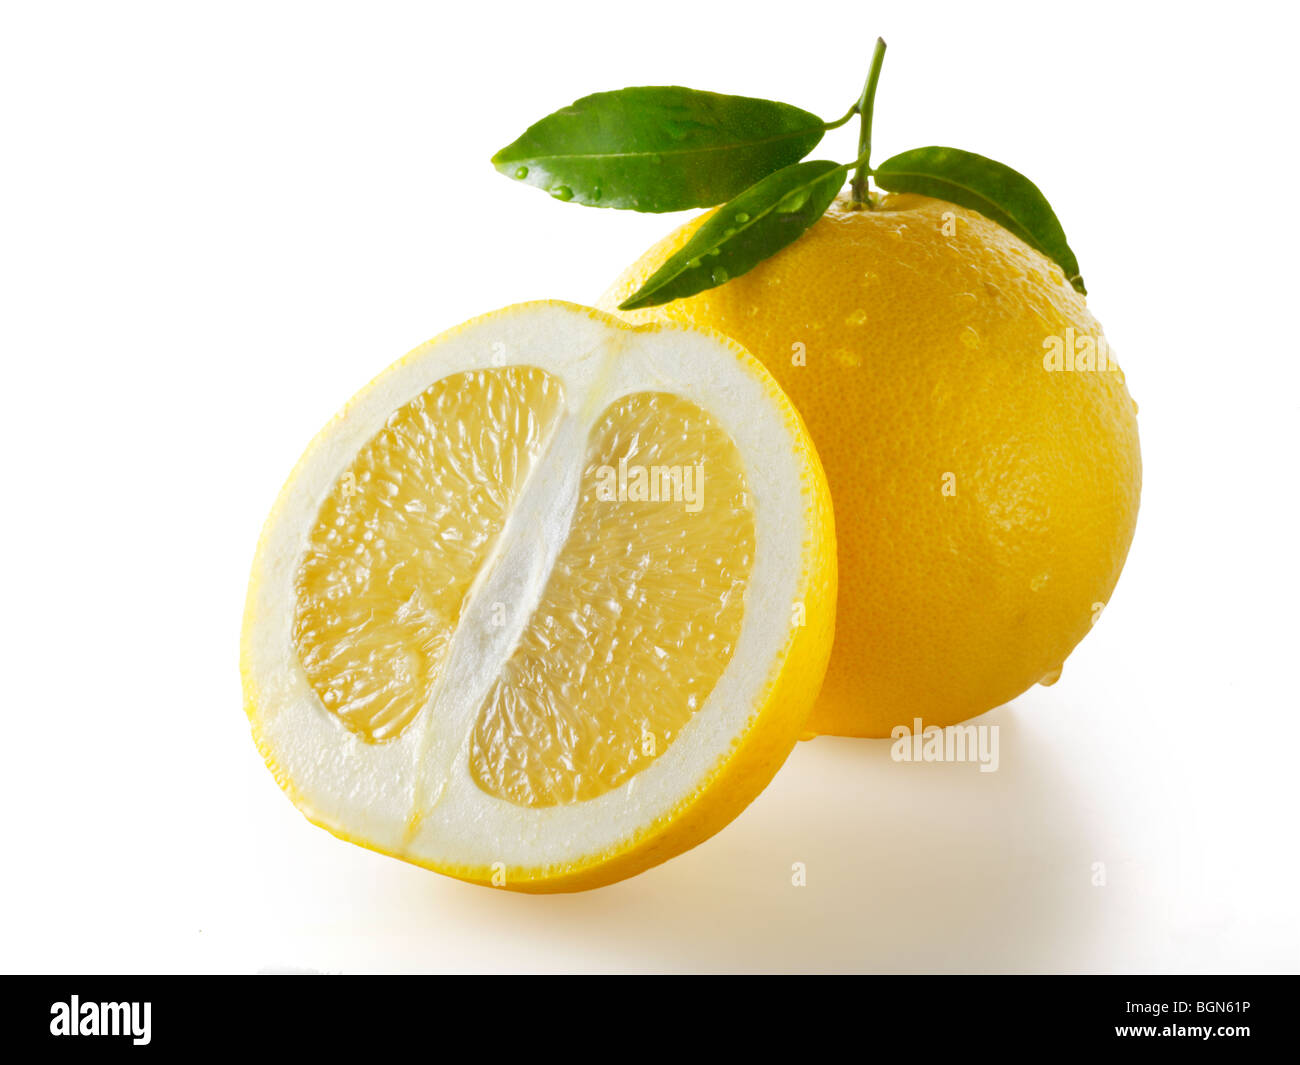 Fresh whole and cut cut grapefruit with leaves against a white background Stock Photo